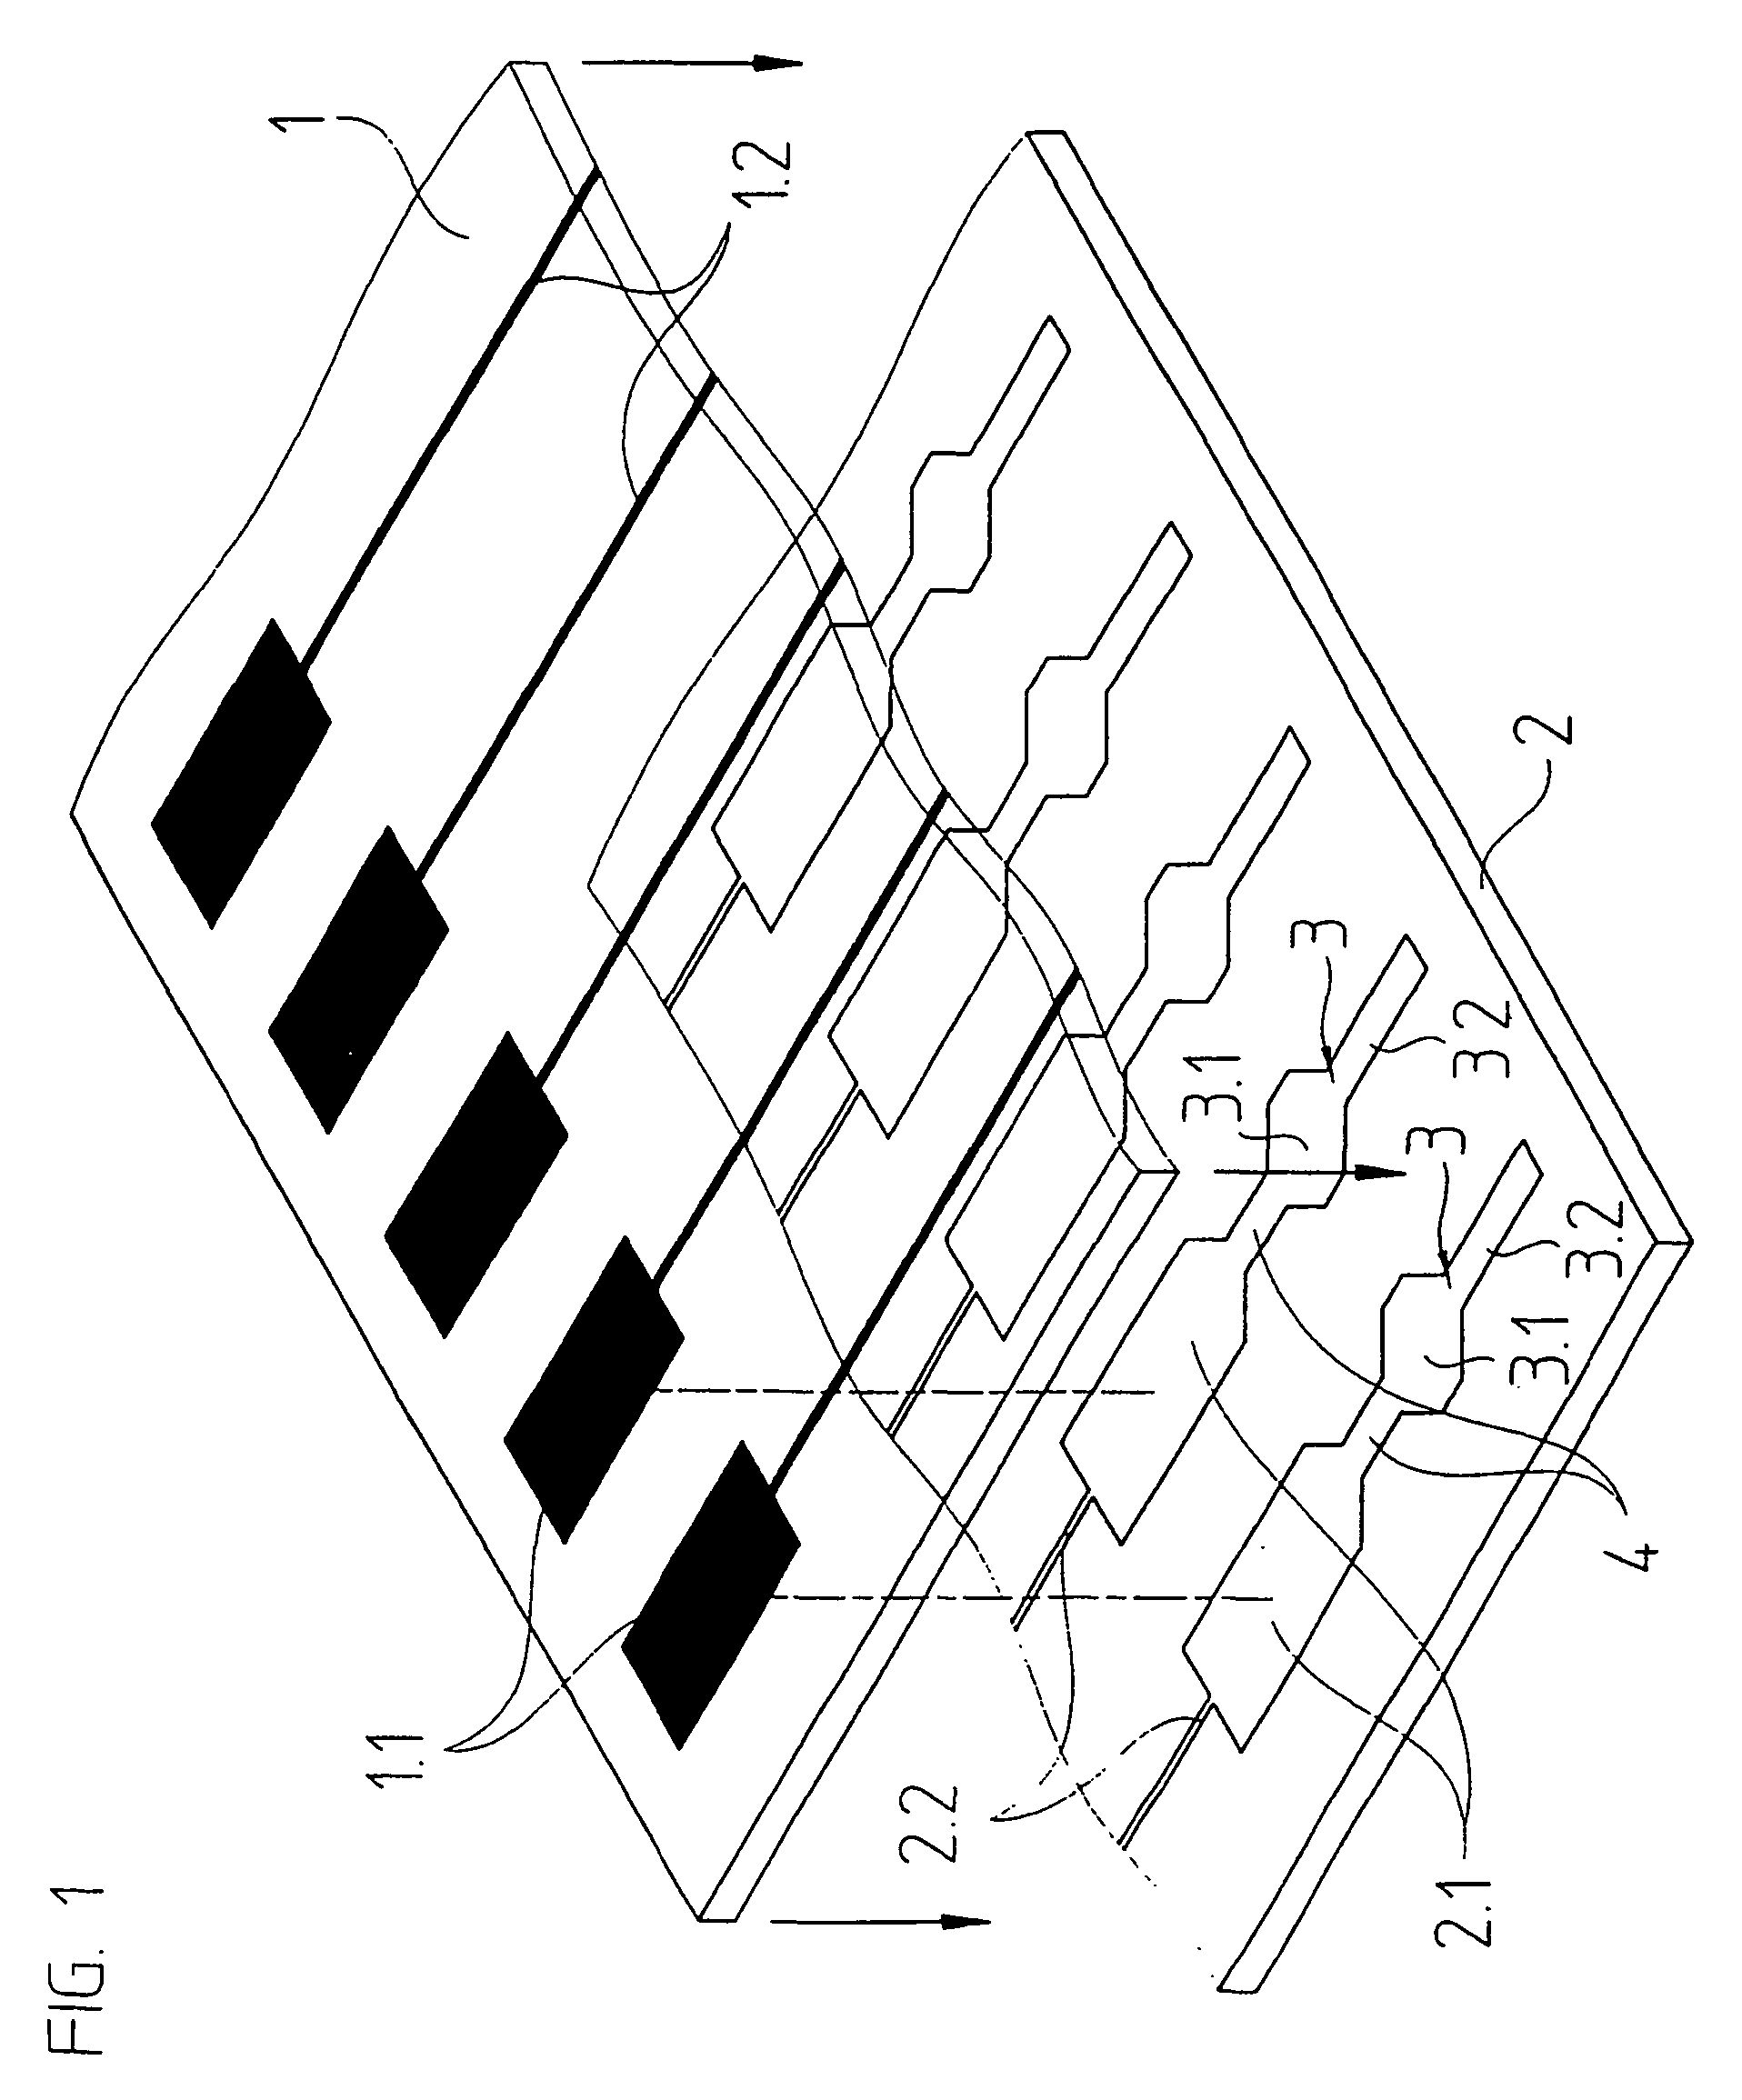 Composite comprised of flat conductor elements